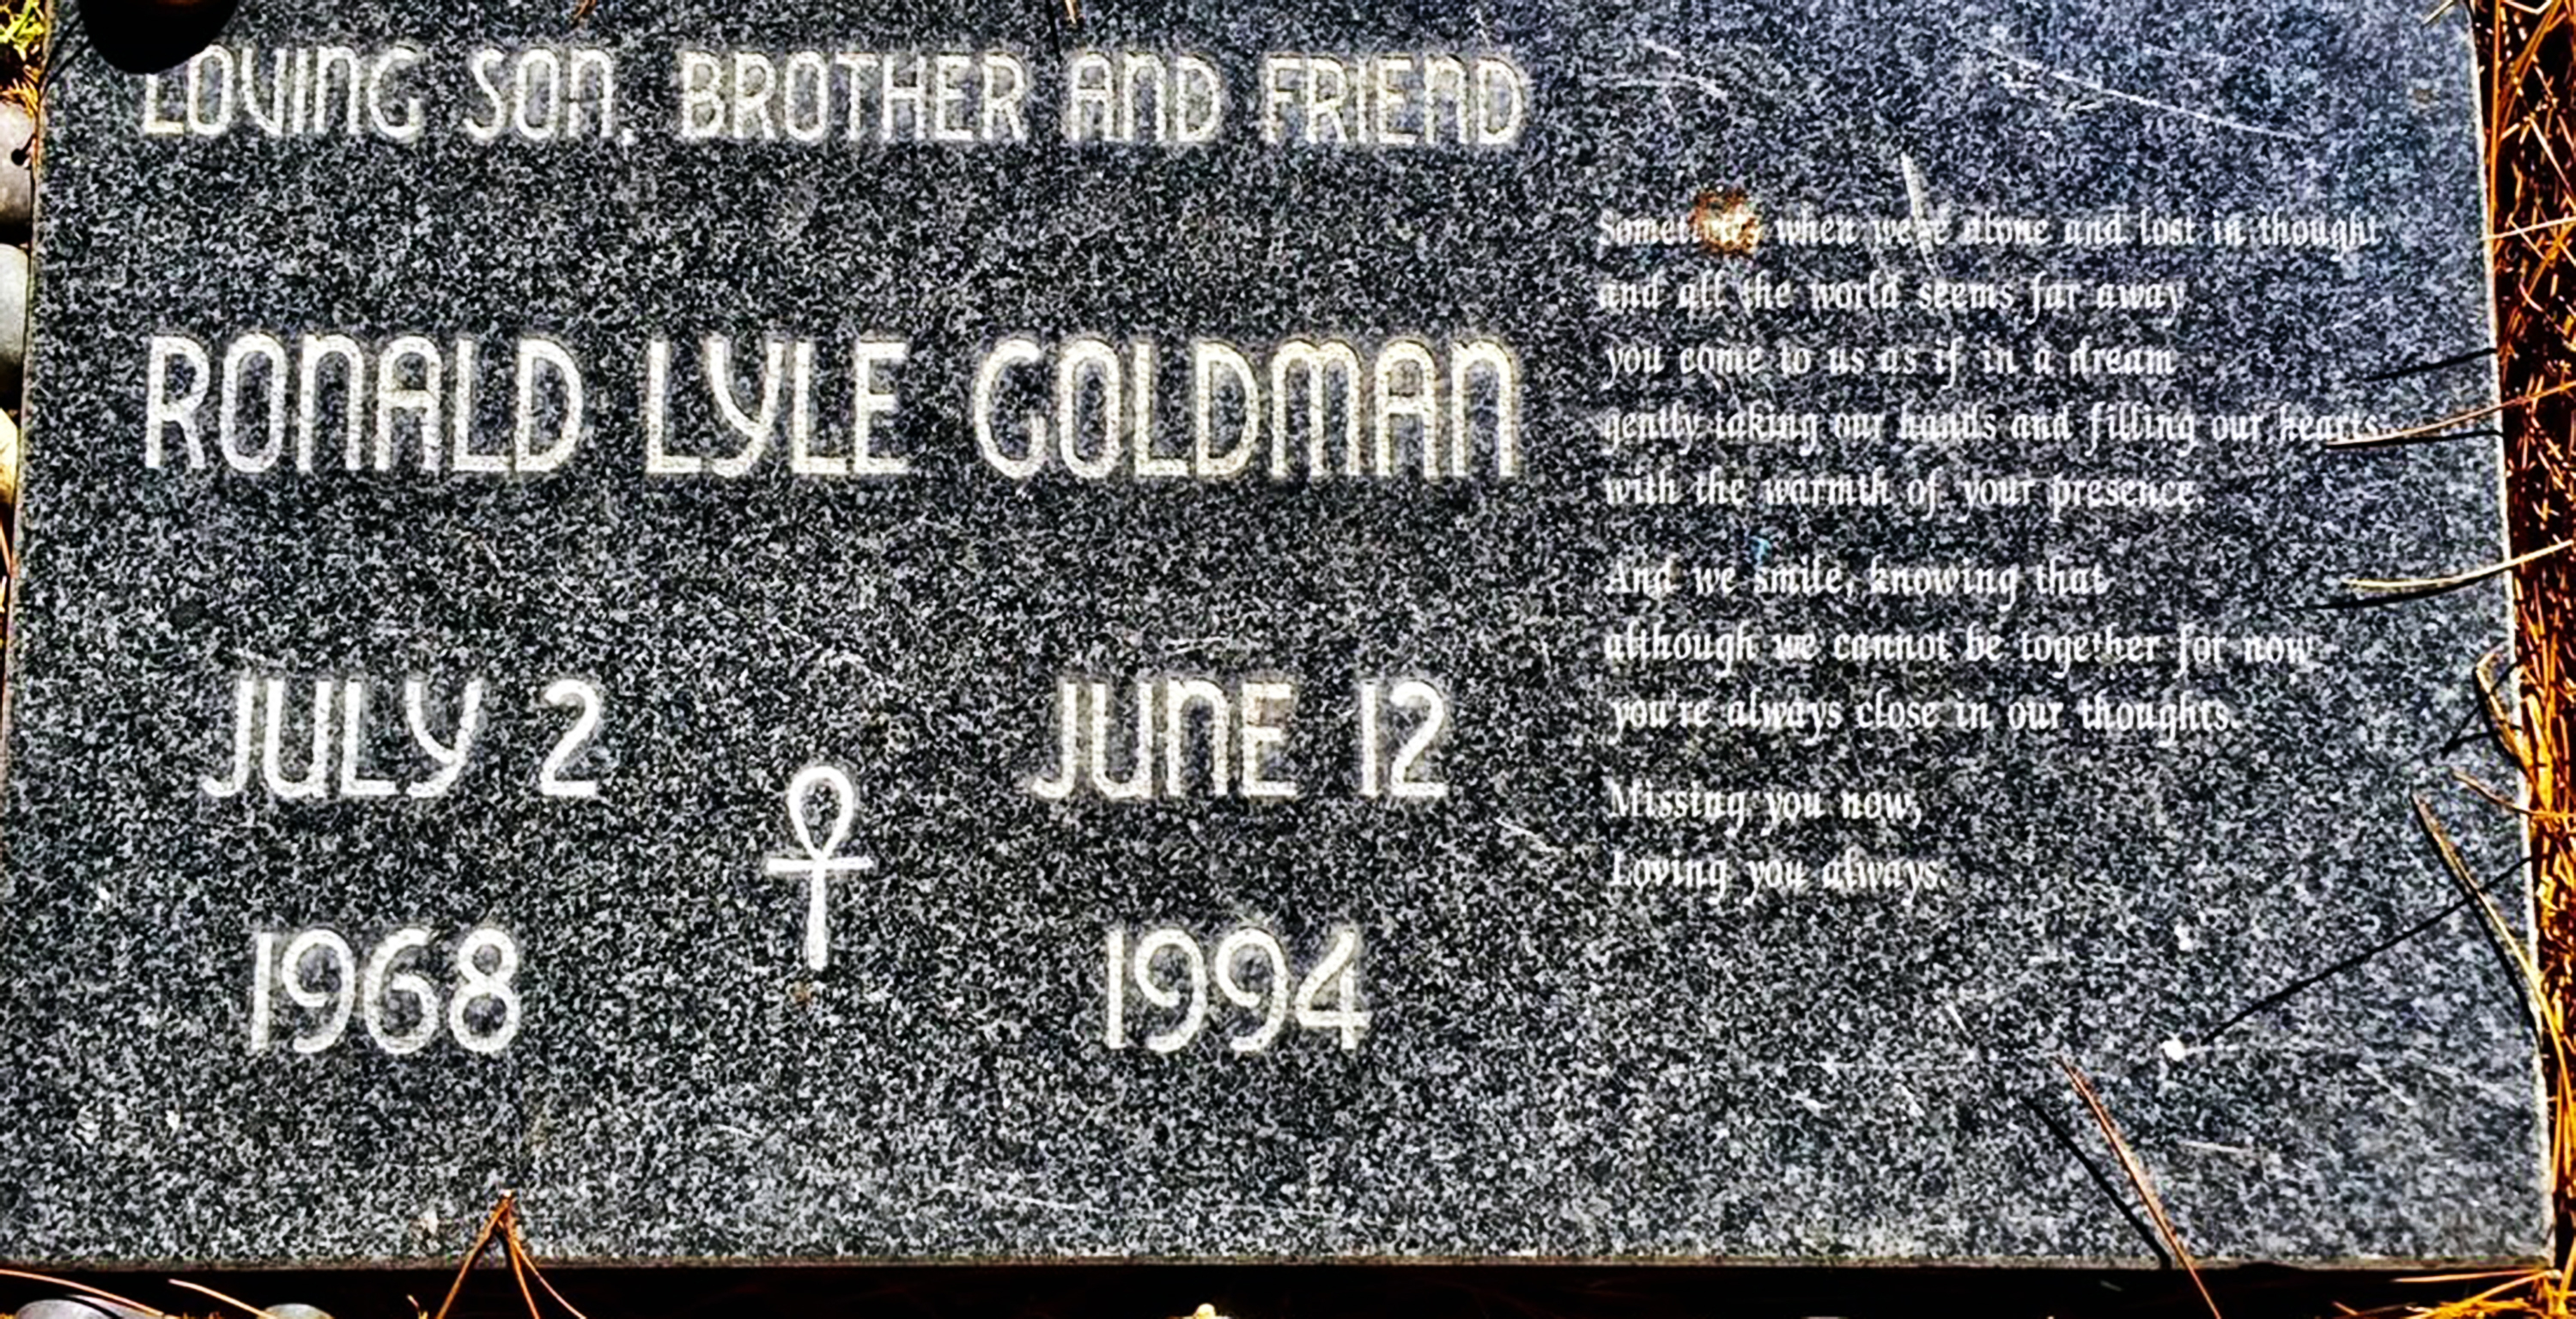 Gravestone of Ronald Lyle Goldman with birth and death dates, and a heartfelt epitaph